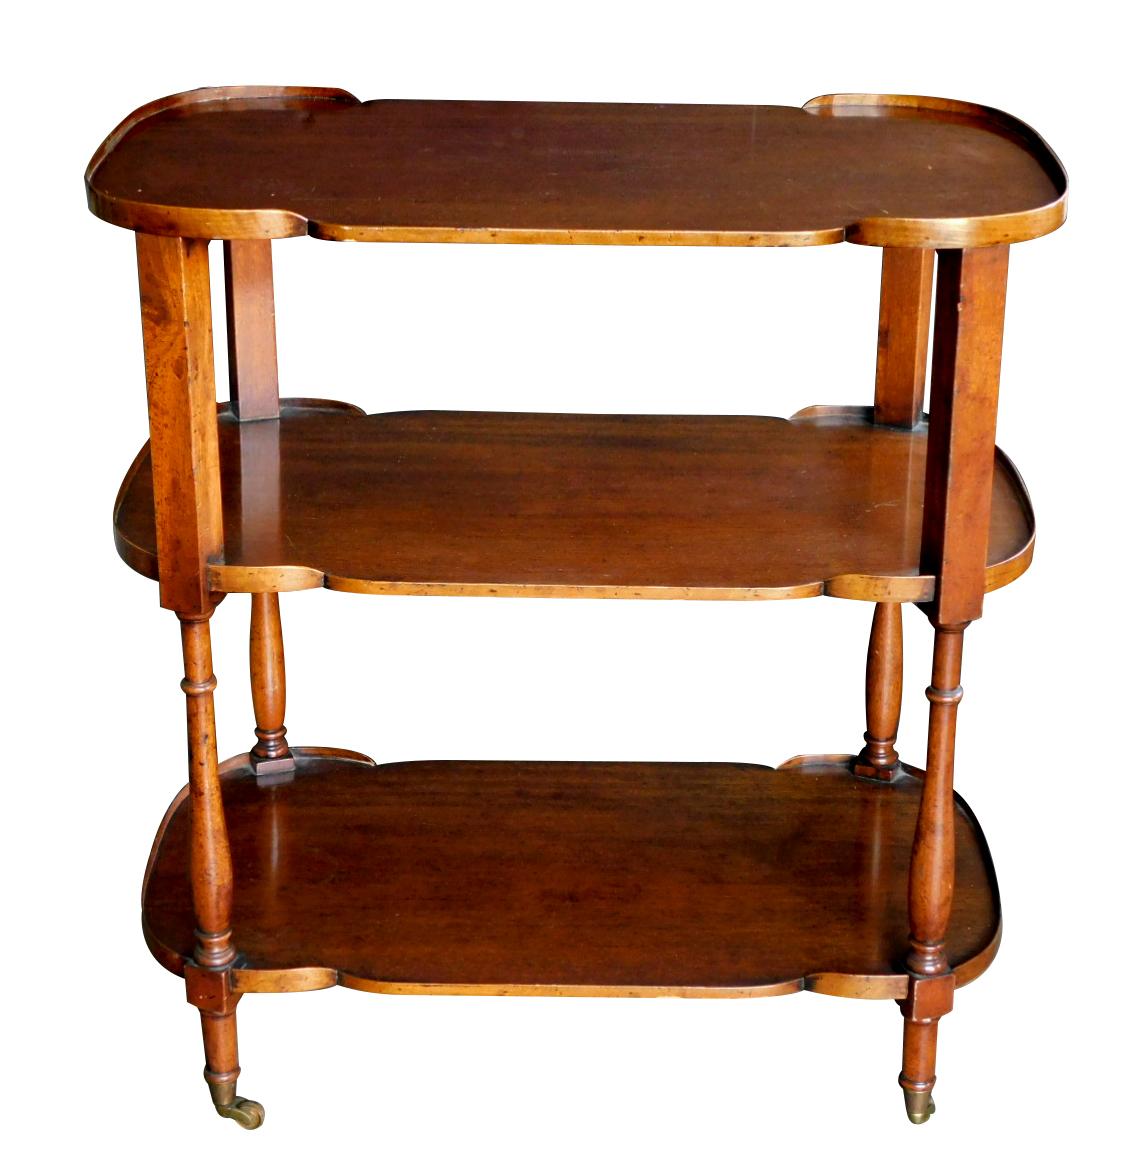 perfect for a bar cart or an étagère, fitted with three shaped shelves each with perimeter gallery; all raised on turned supports ending in casters